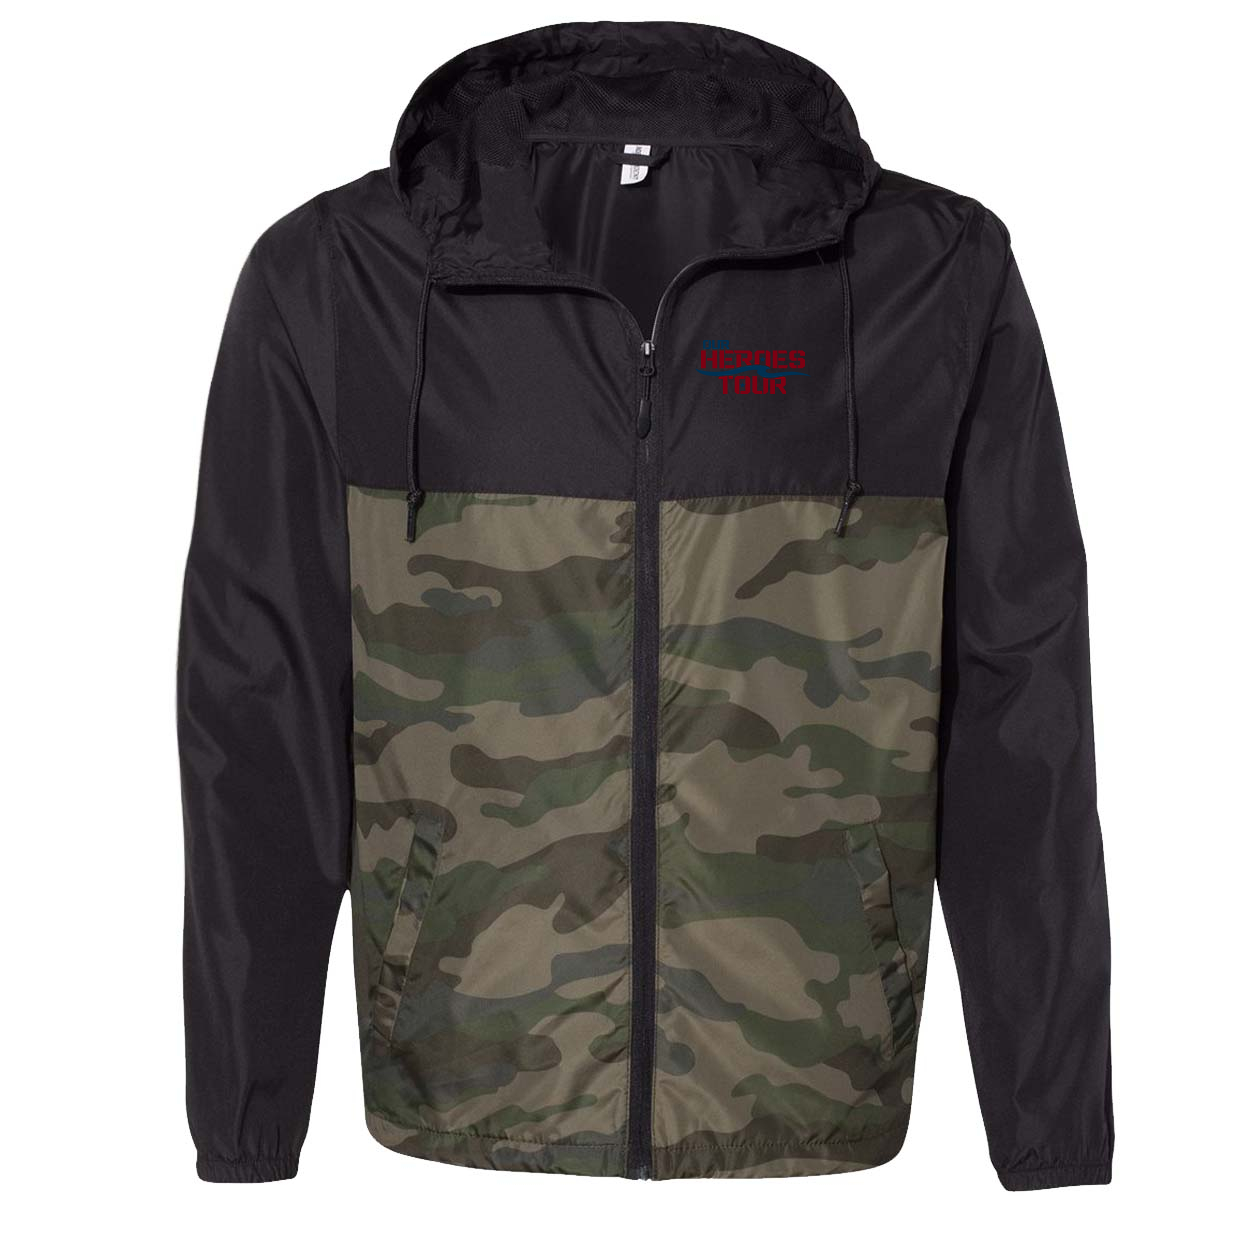 Our Heroes Tour Night Out Lightweight Windbreaker Black/Forest Camo